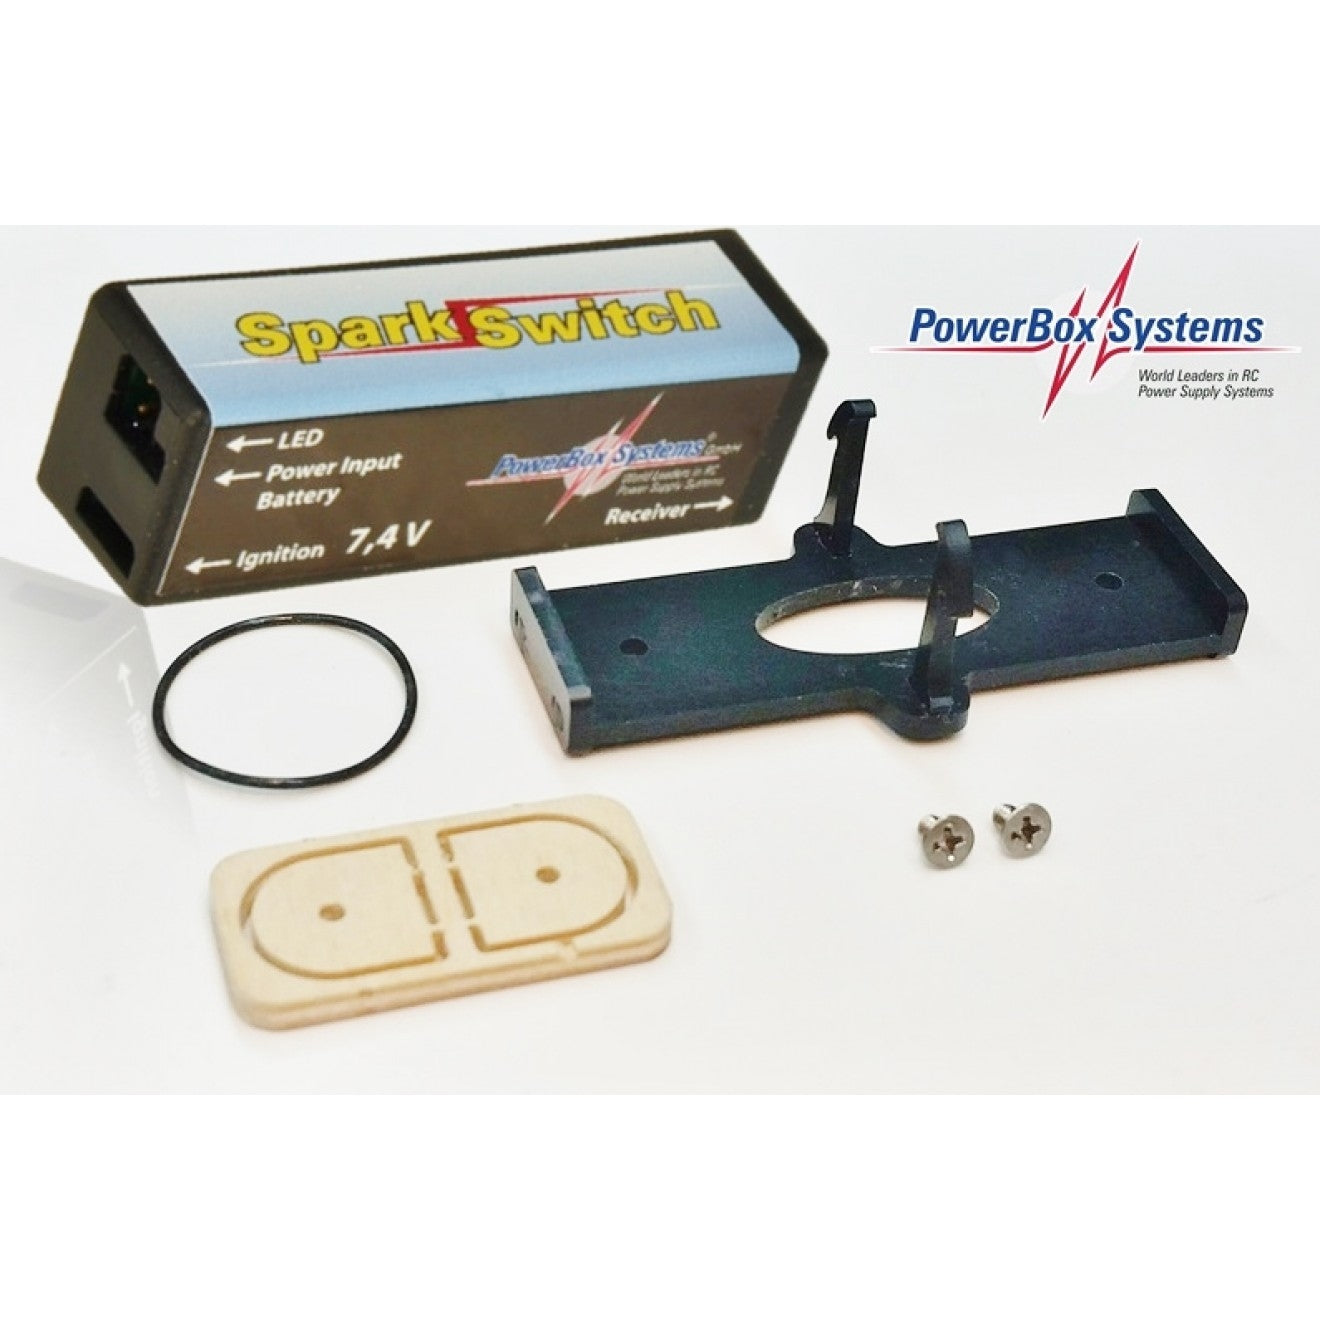 PowerBox Systems Spark Switch Click Holder from STV-Tech 021-04